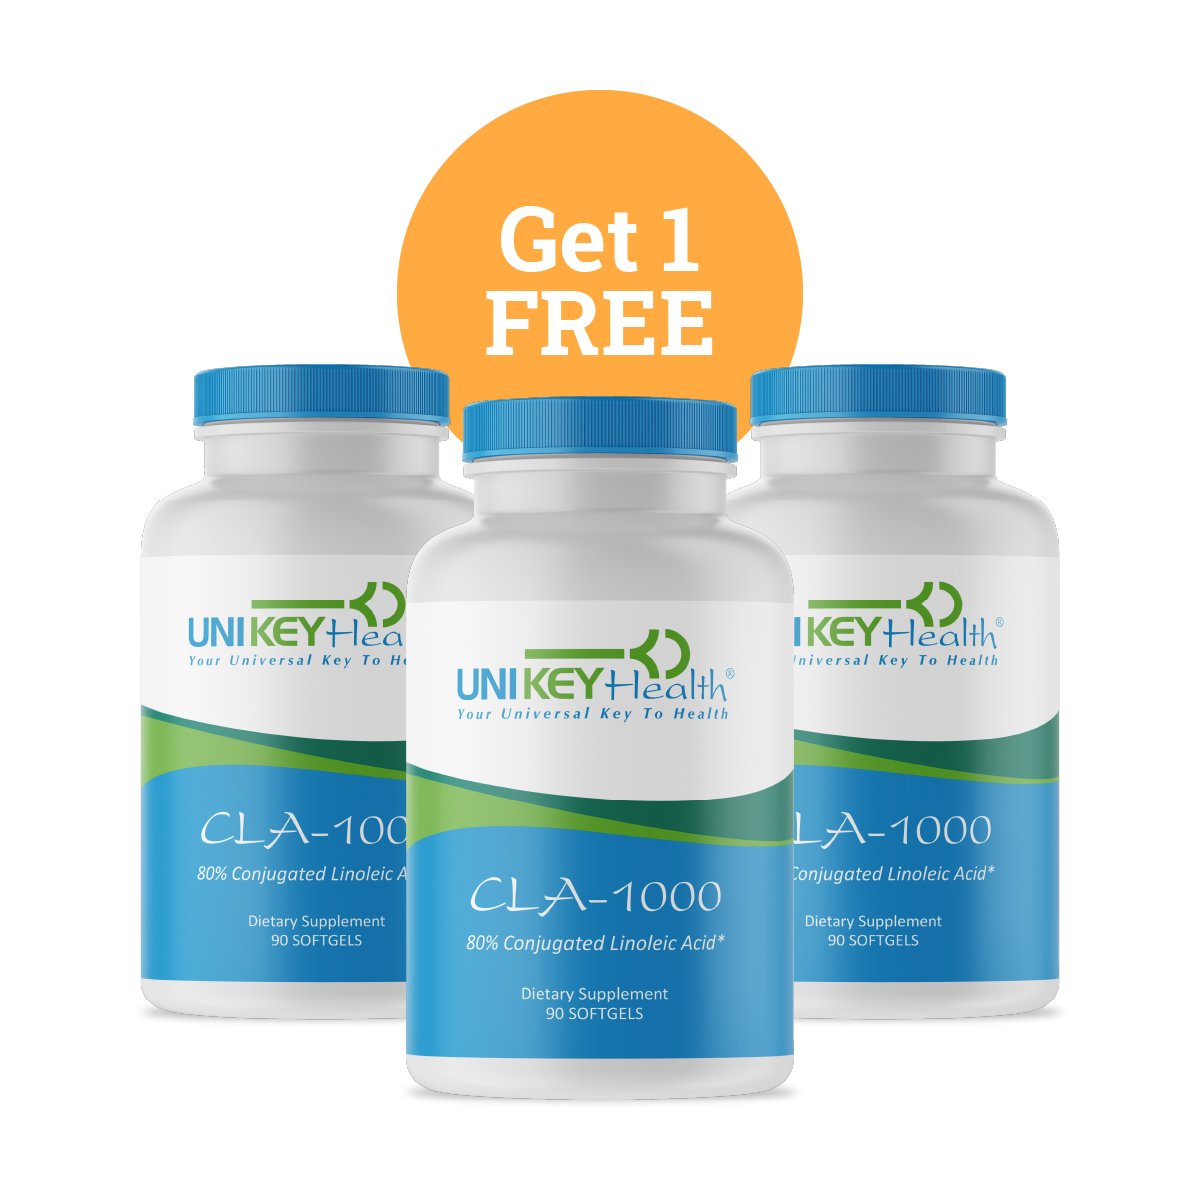 Buy 2 CLA-1000 to get 1 FREE!